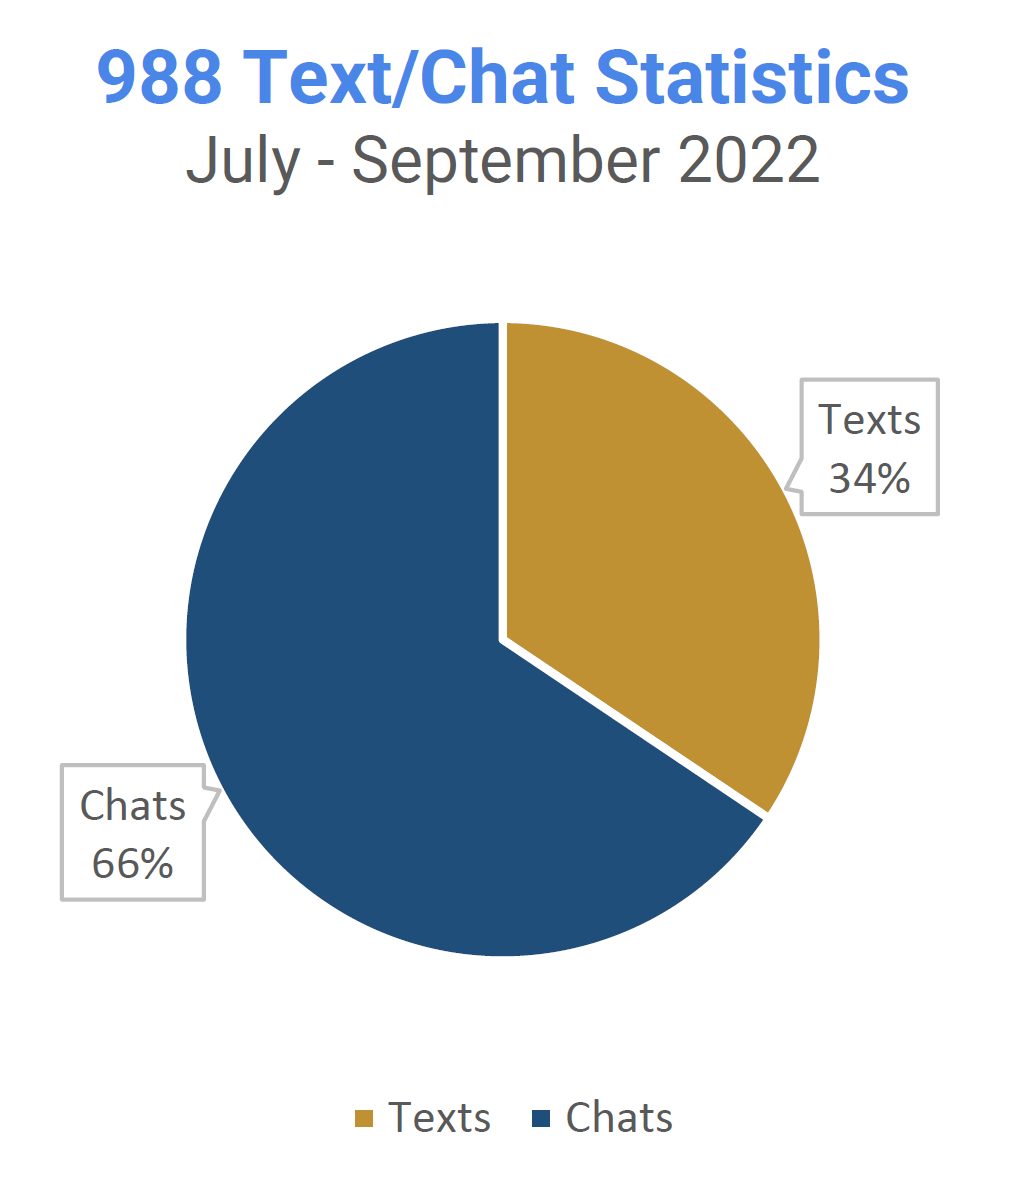 988 text/chat statistics July to September 2022